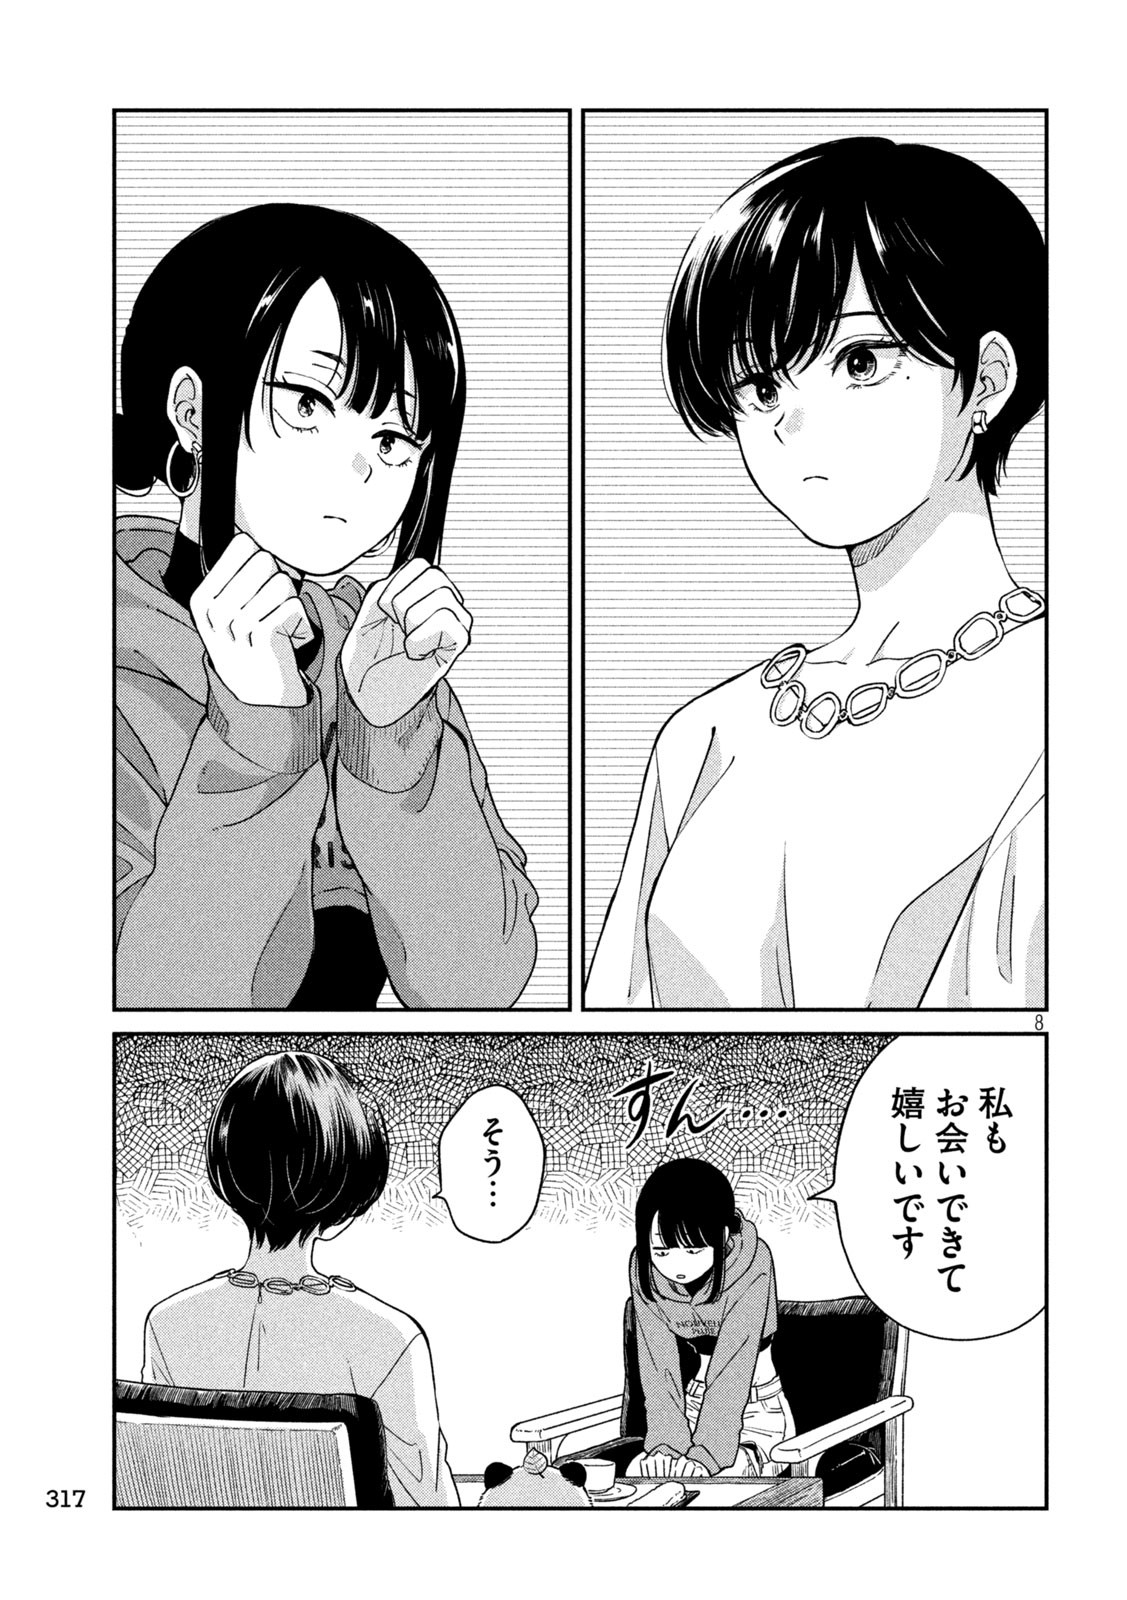 Ame to Kimi to - Chapter 100 - Page 8